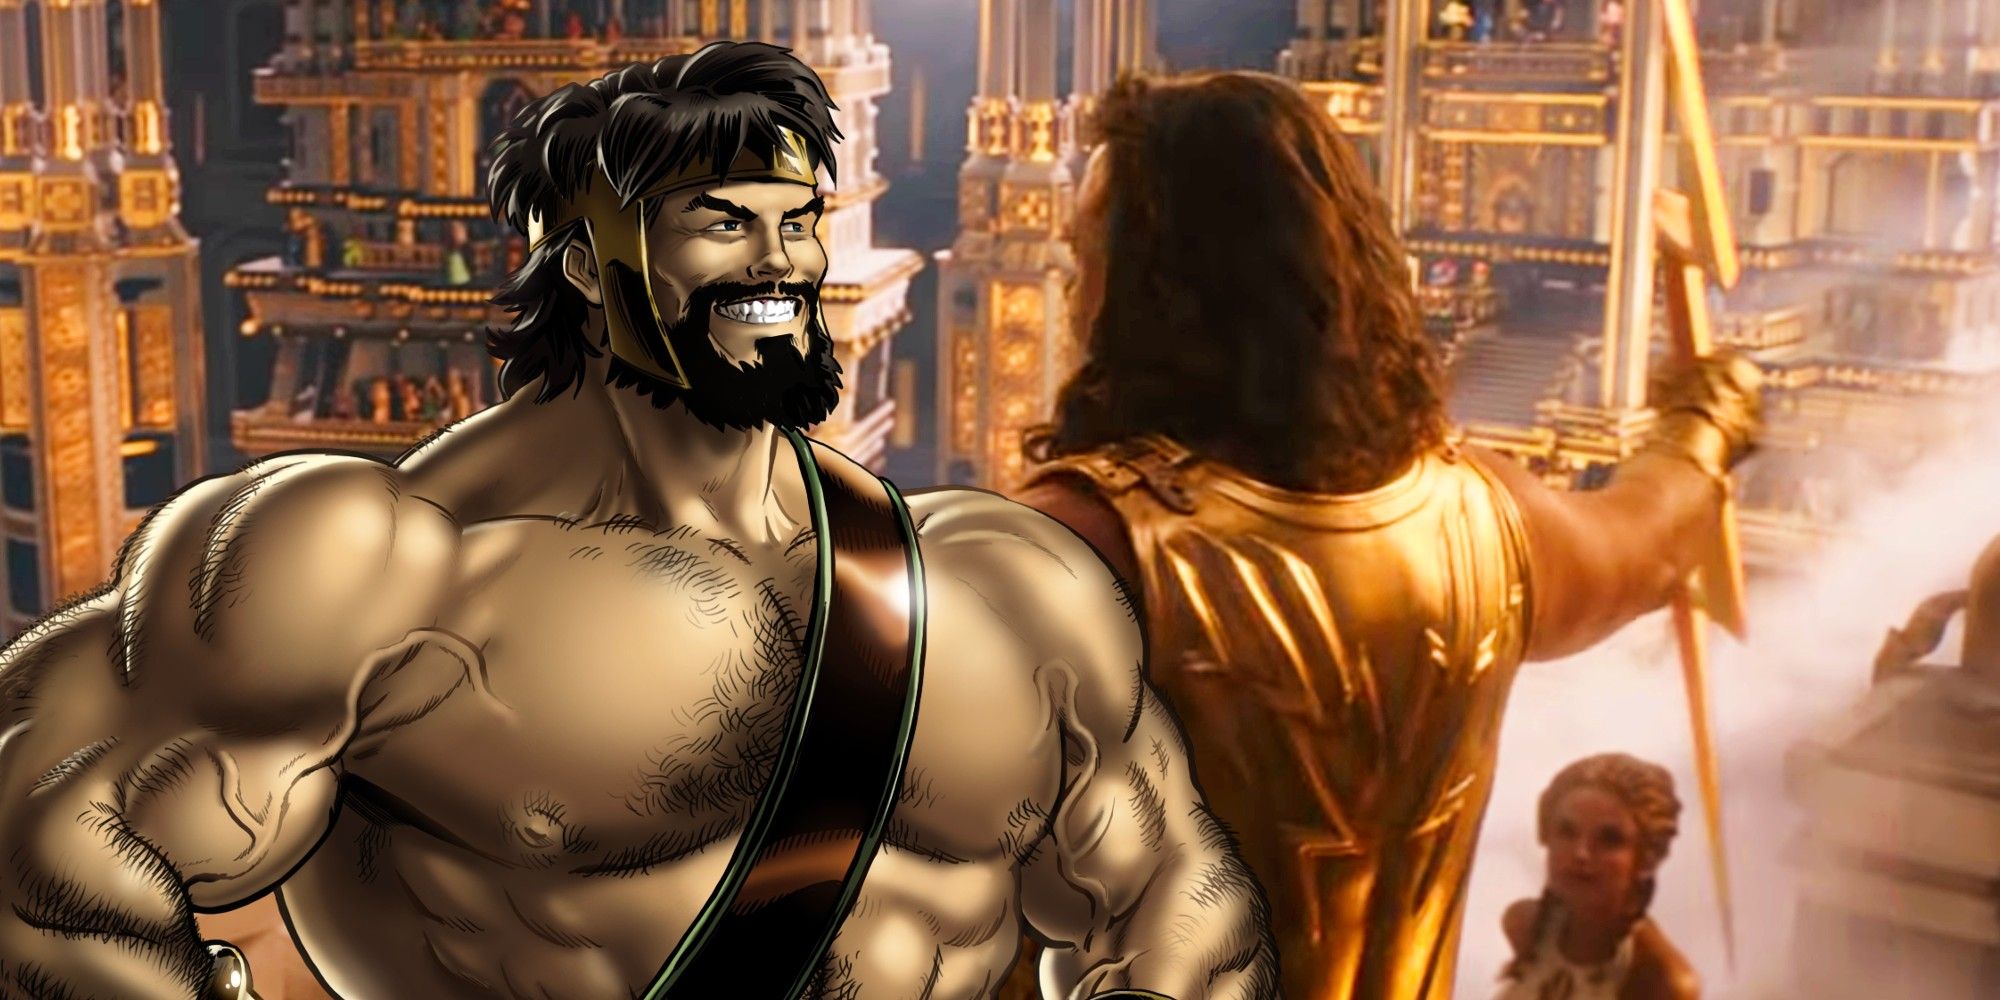 Hercules from Marvel Comics and Zeus from Thor Love and Thunder